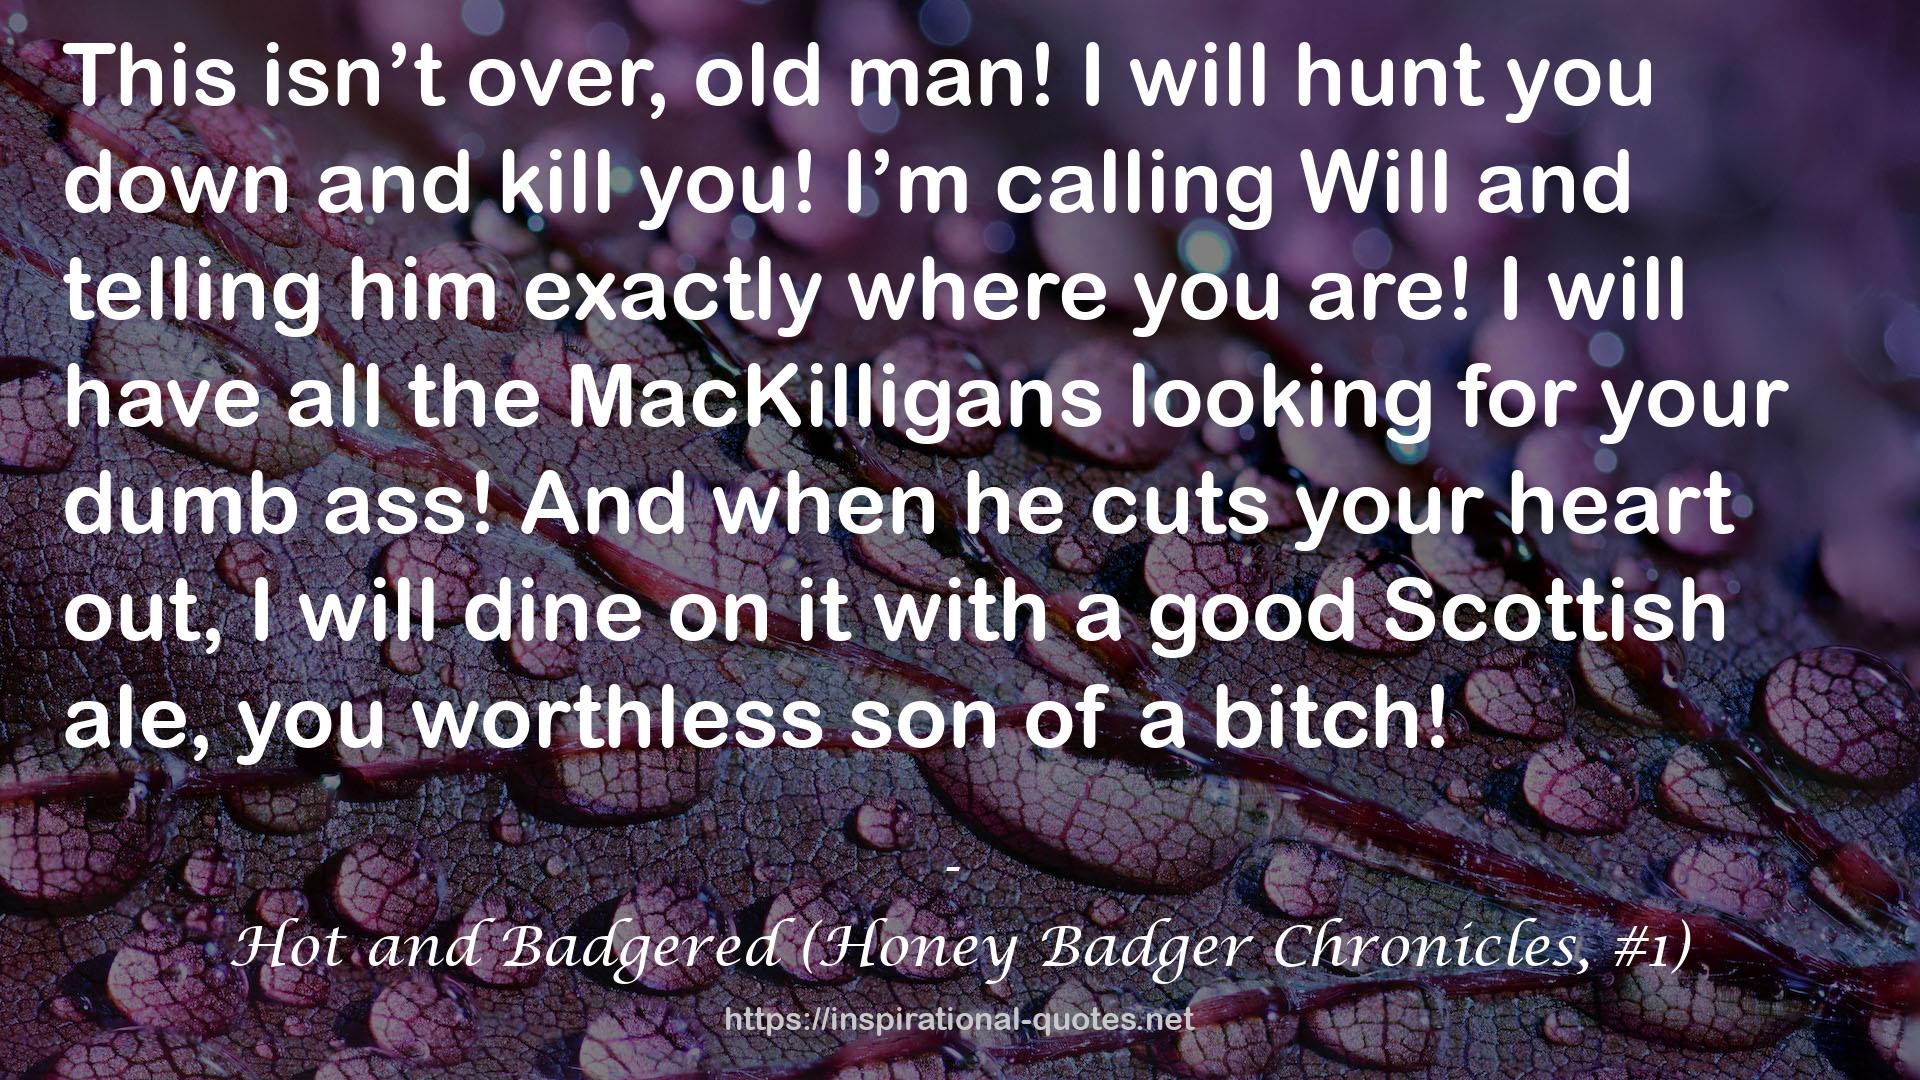 Hot and Badgered (Honey Badger Chronicles, #1) QUOTES